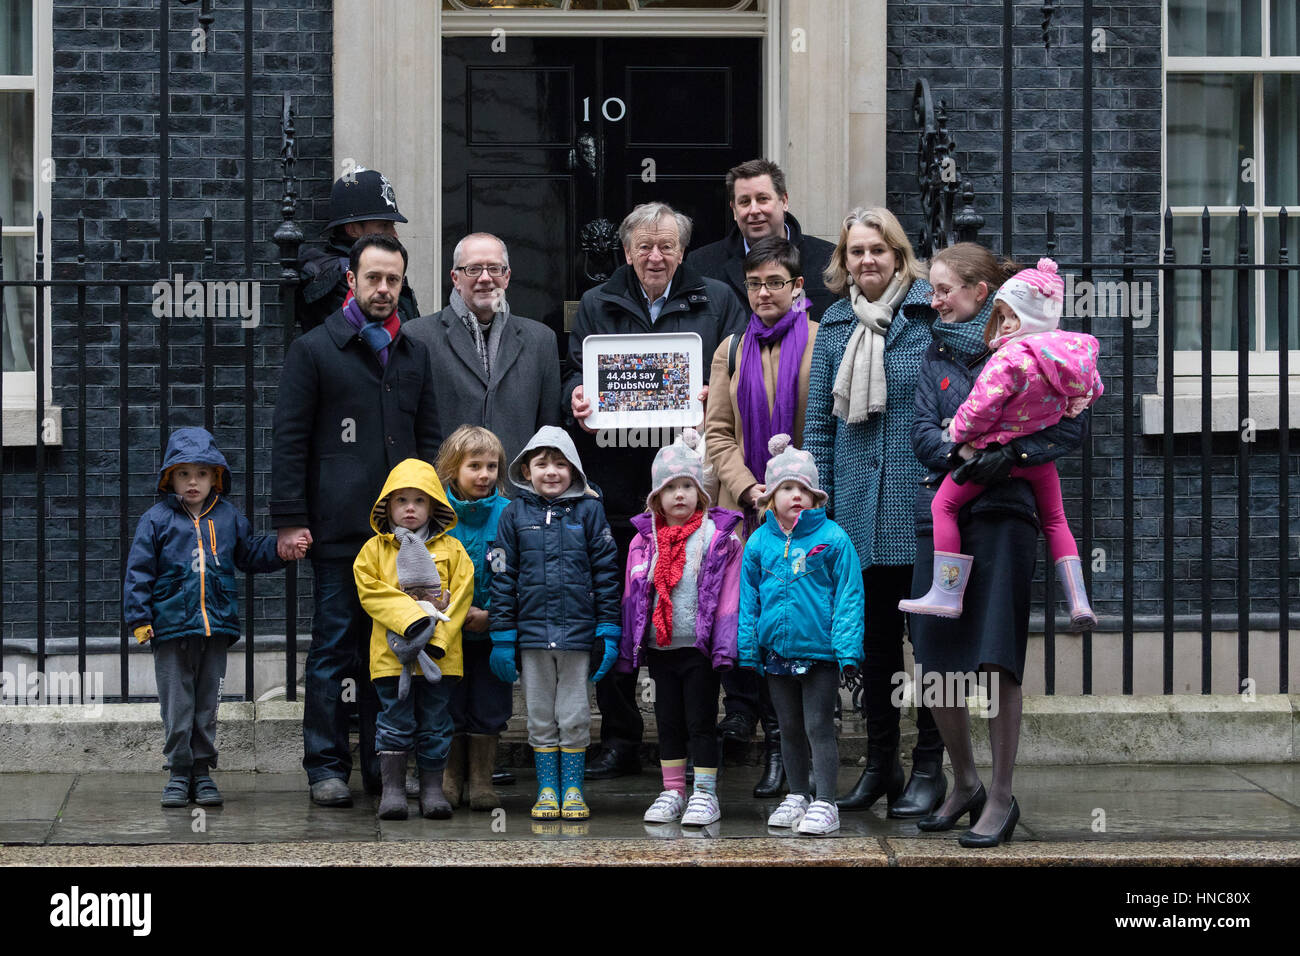 London, UK. 11th Feb 2017. Lord Alf Dubs and supporters, with their children, deliver a 44,435 strong petition to 10 Downing Street, calling on the Prime Minister, Theresa May to reconsider the ending of the Dubs Amendment scheme that allows unaccompanied child refugee migrants a safe passage into the UK. Lord Dubs arrived in the UK himself as a child refugee, along with nearly 10,000 predominantly Jewish children who were fleeing Nazi controlled Europe. Credit: Vickie Flores/Alamy Live News Stock Photo